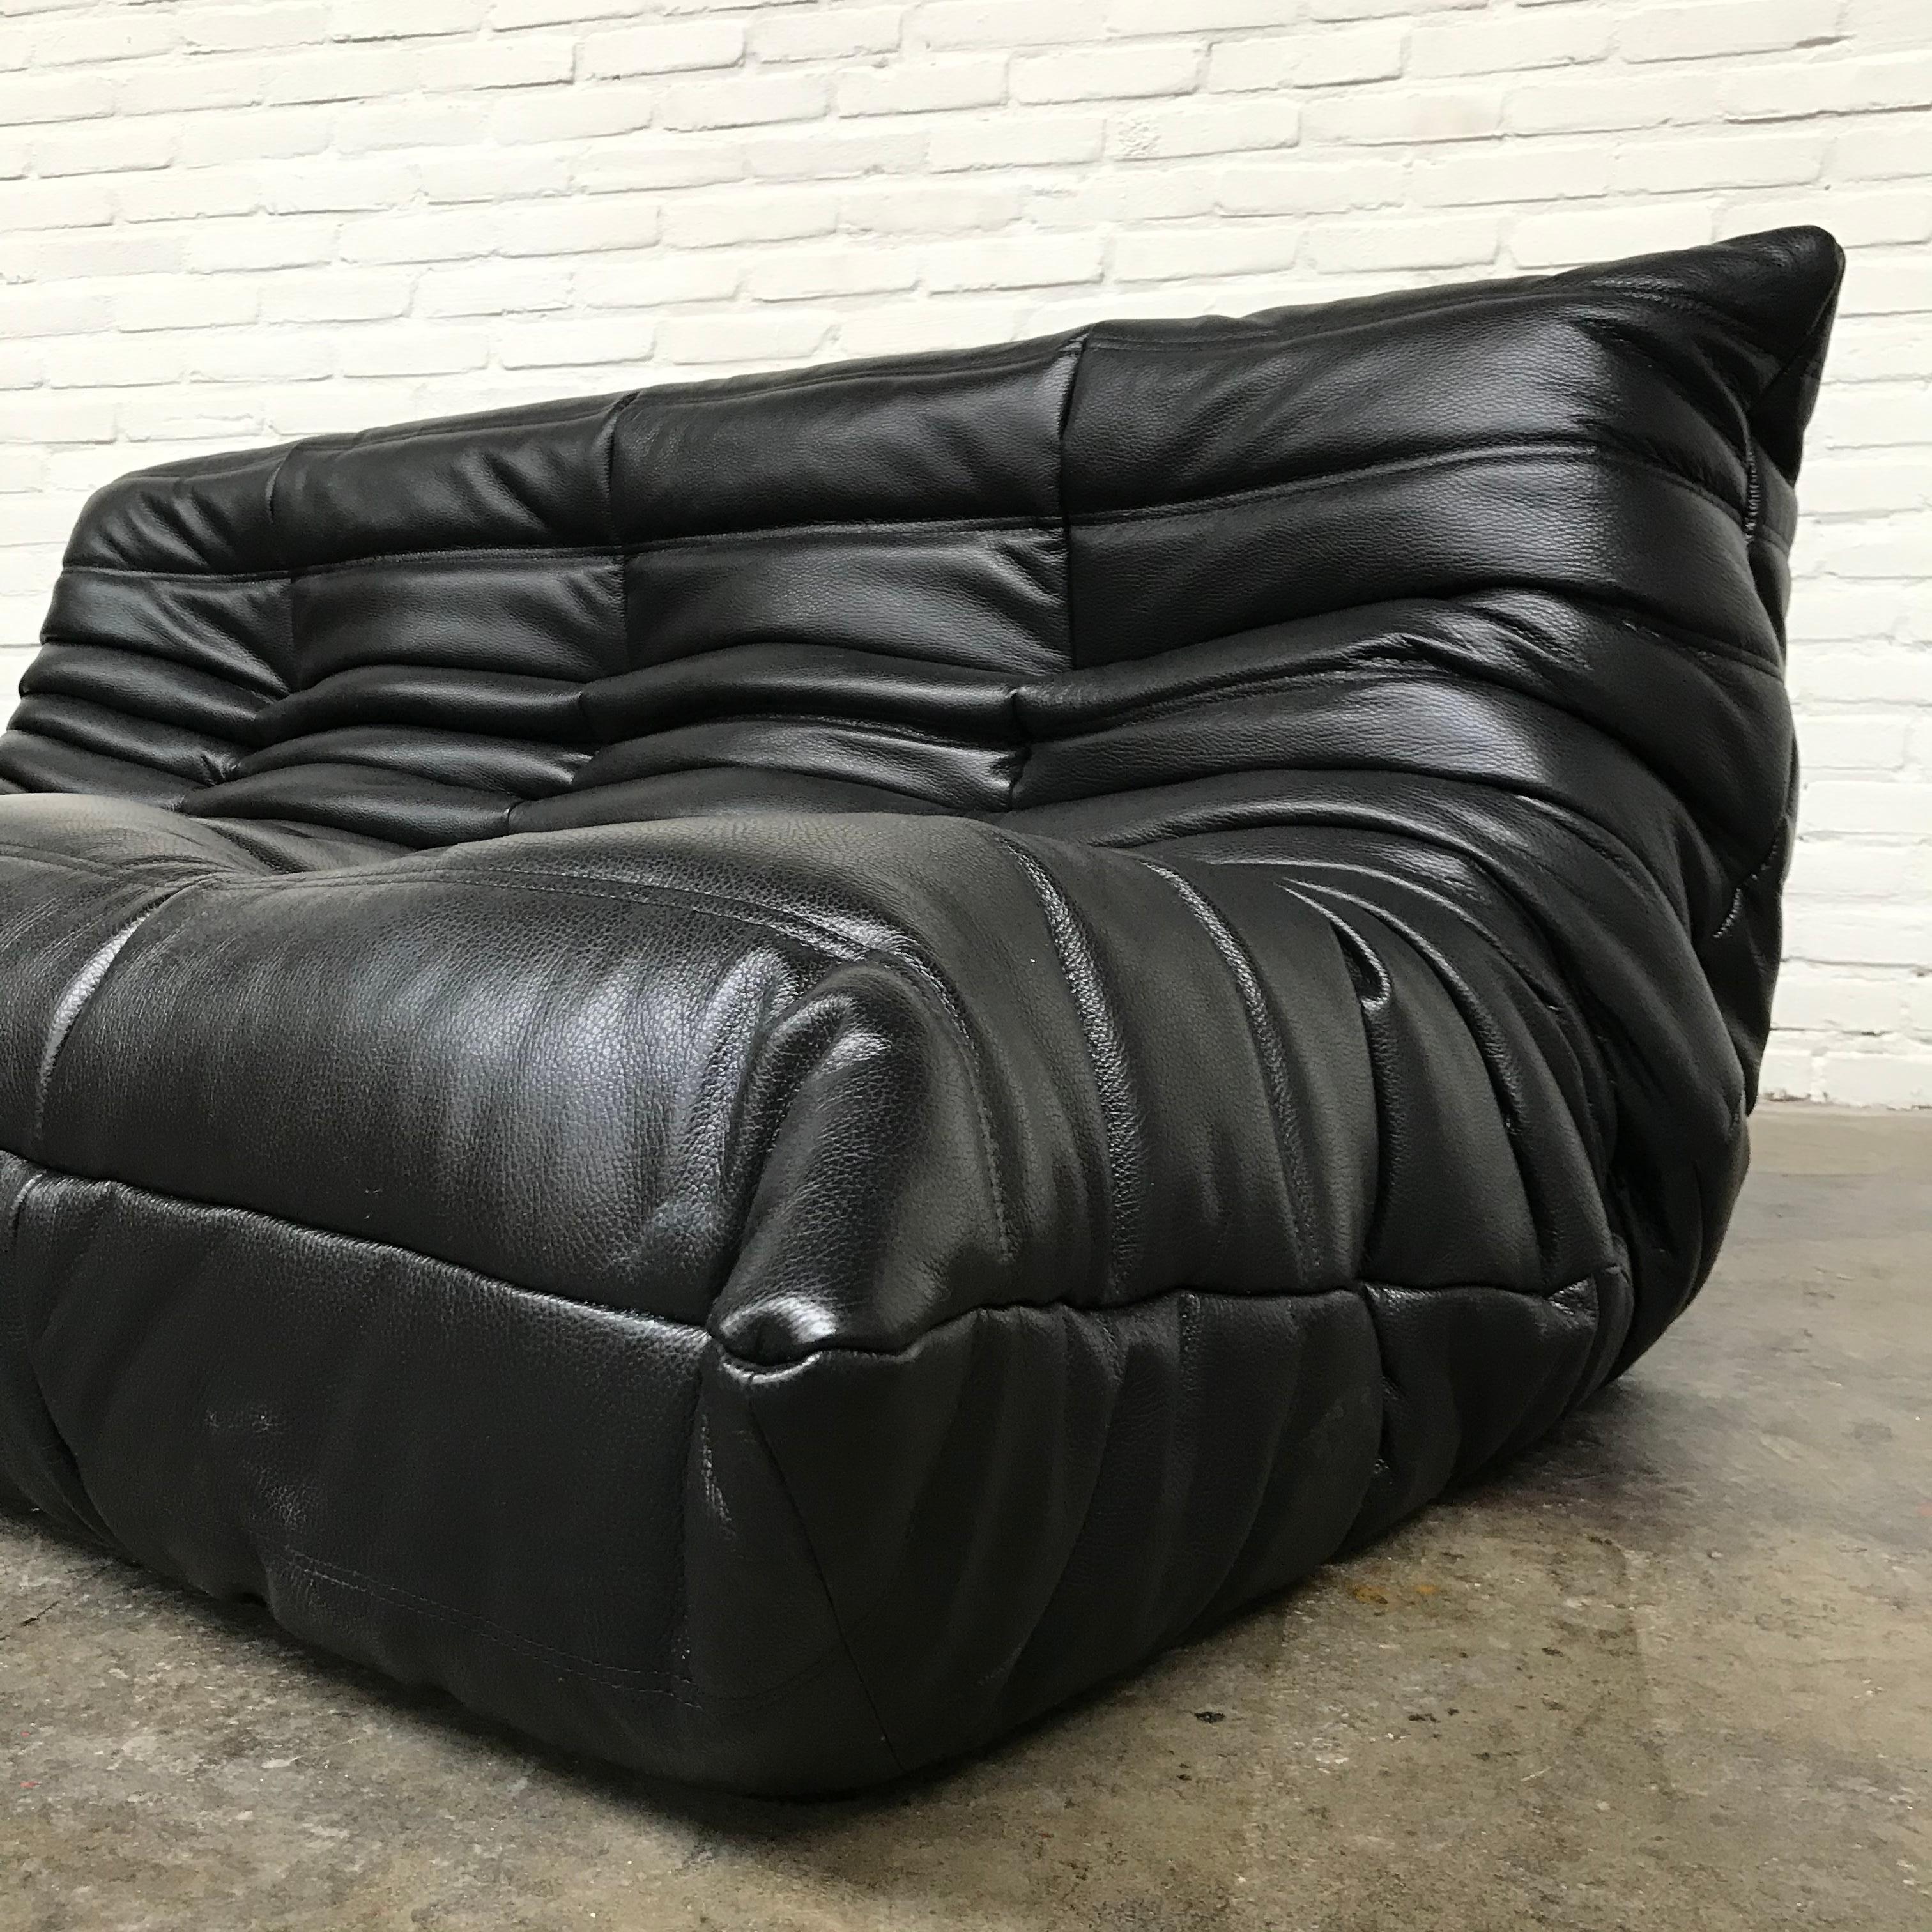 French Large Togo Sofa in Black Leather by Michel Ducaroy for Ligne Roset In Excellent Condition For Sale In Eindhoven, Netherlands